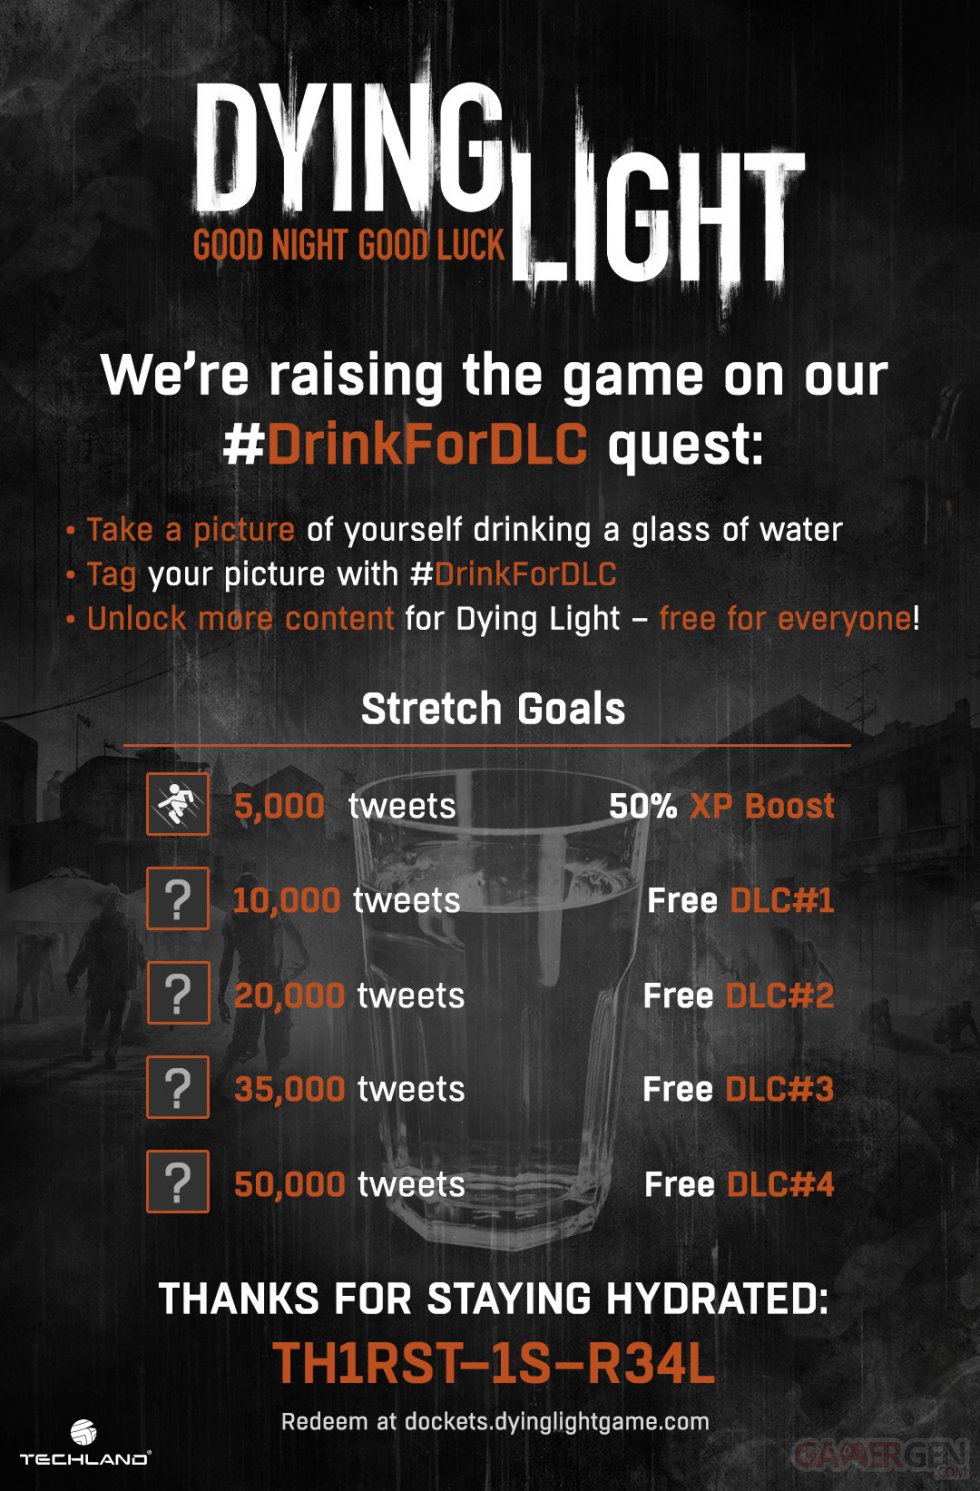 Dying Light #DrinkForDLC